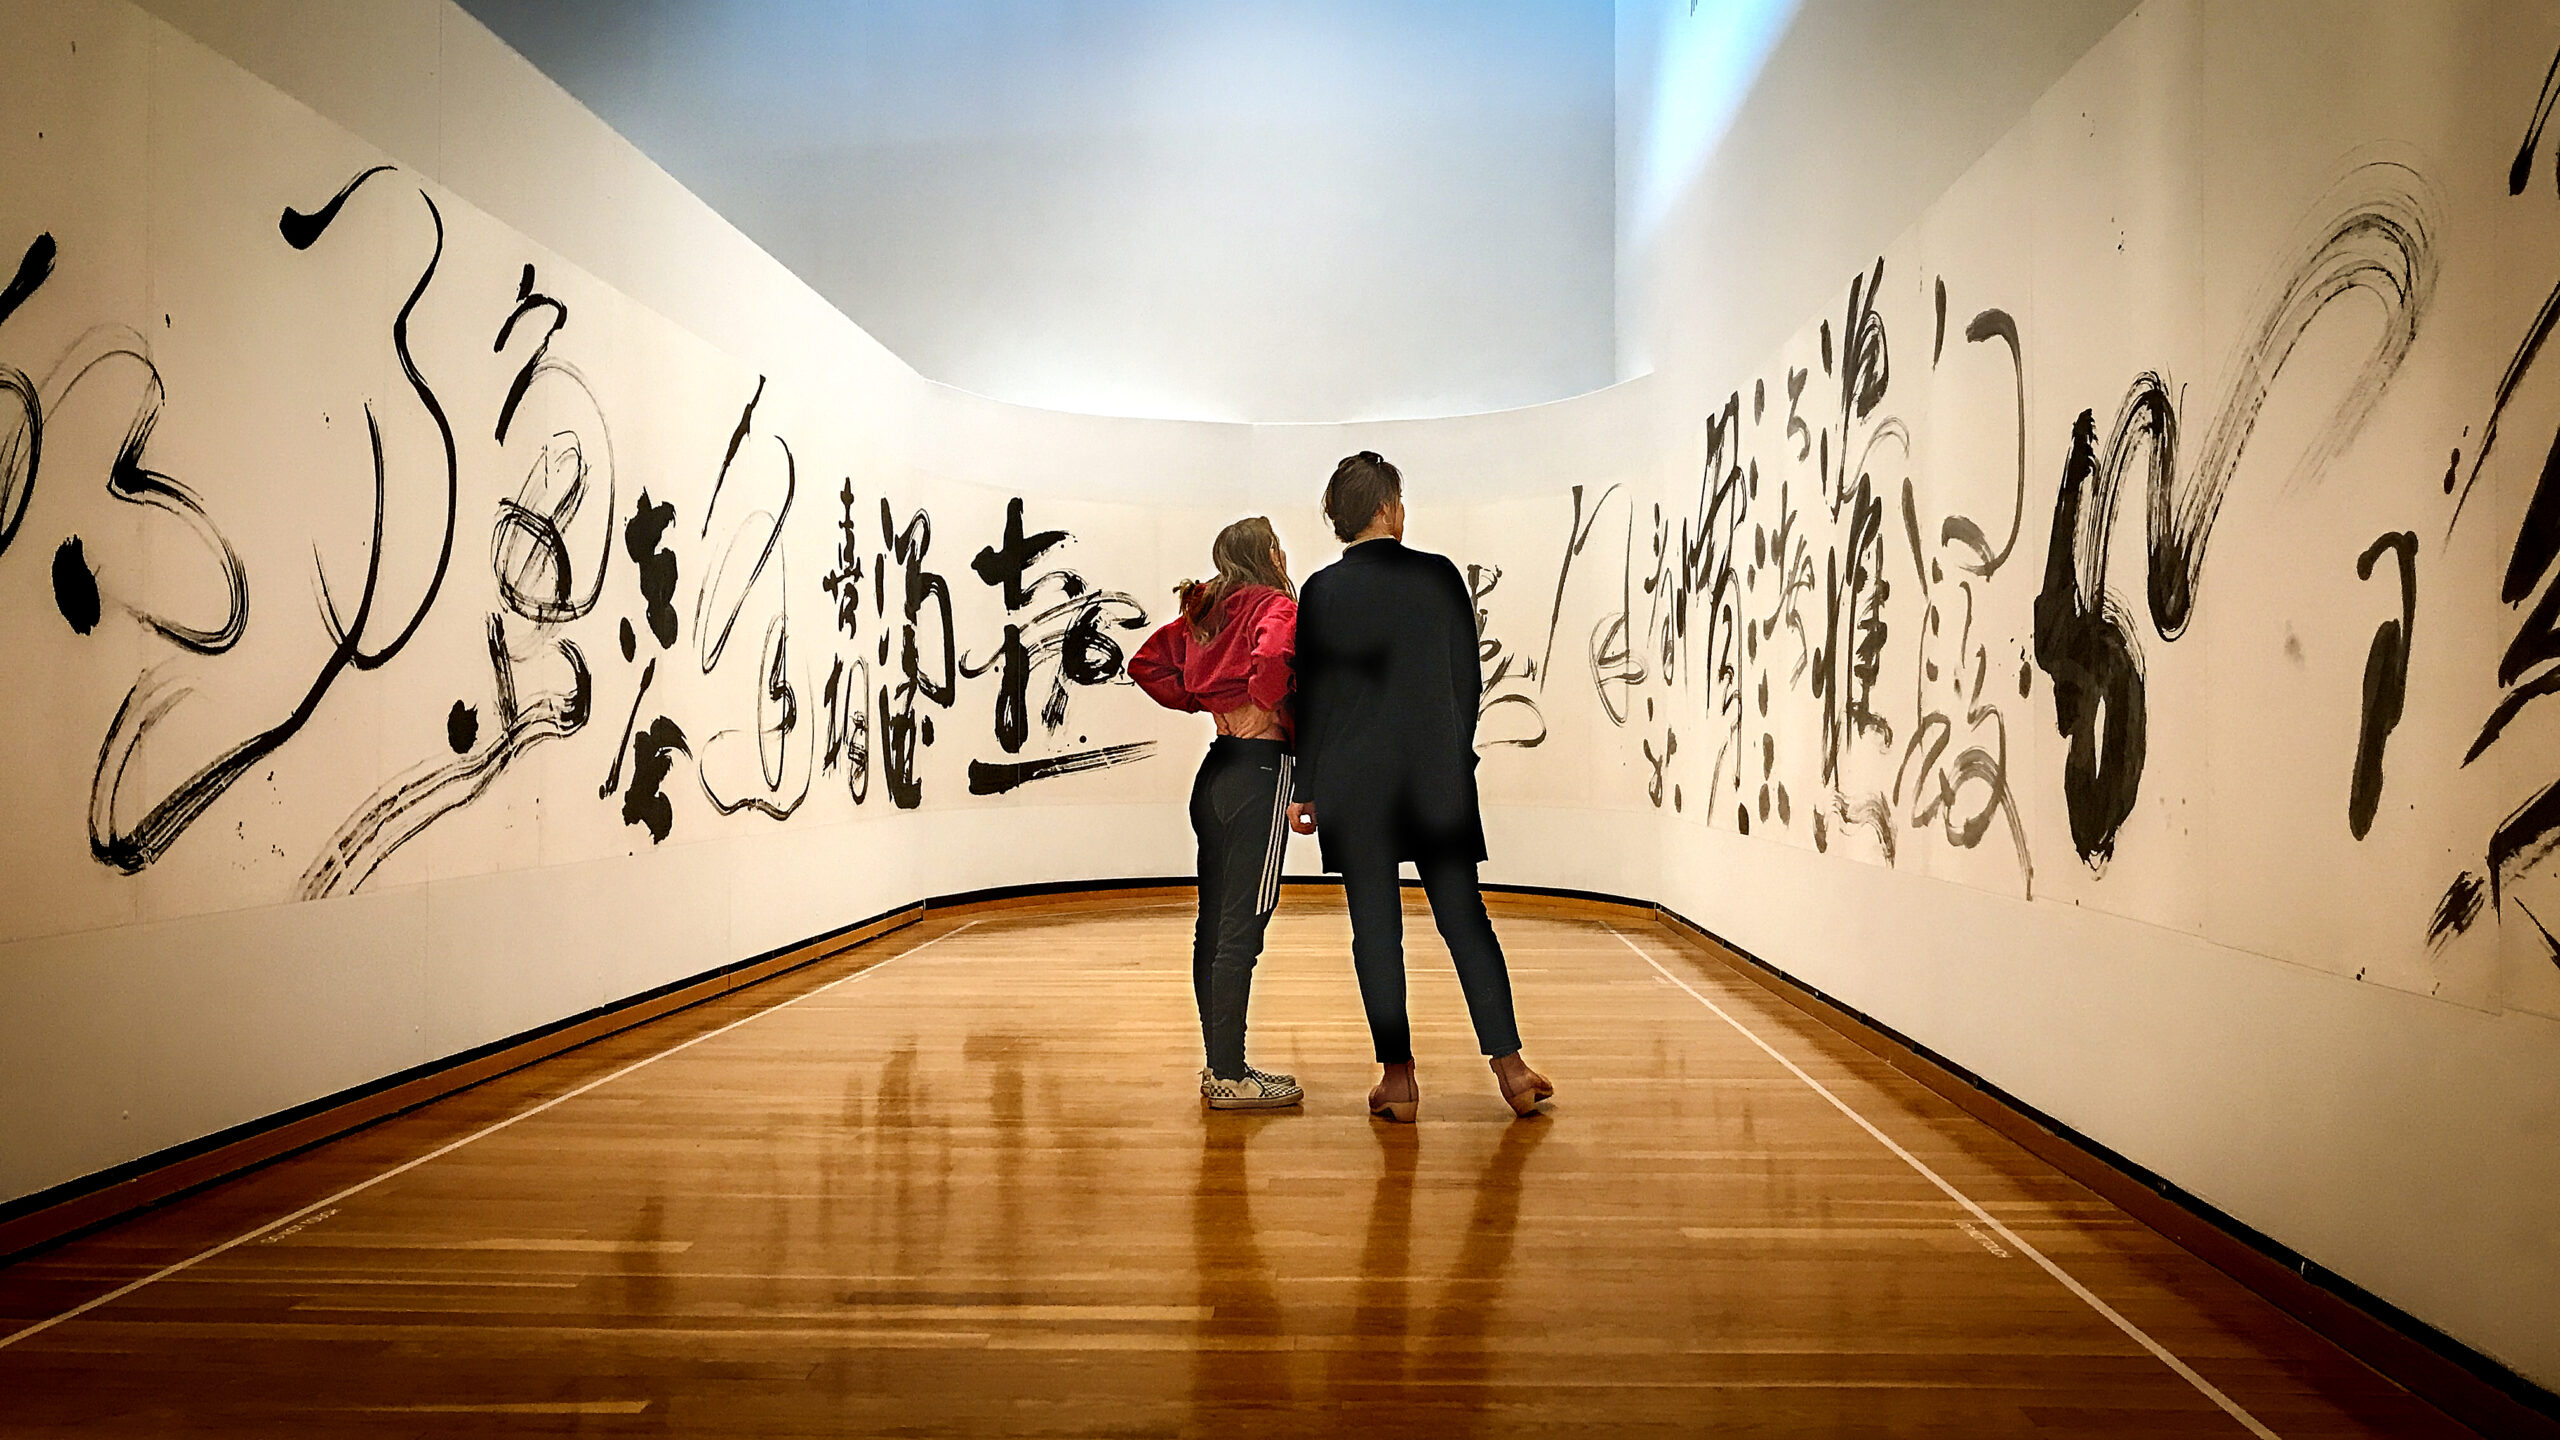 Visitors to the Herbert F. Johnson Museum of Art take in the Immortal at the River, a 54-meter-long cursive-script calligraphy work by Tong Yang-Tze.